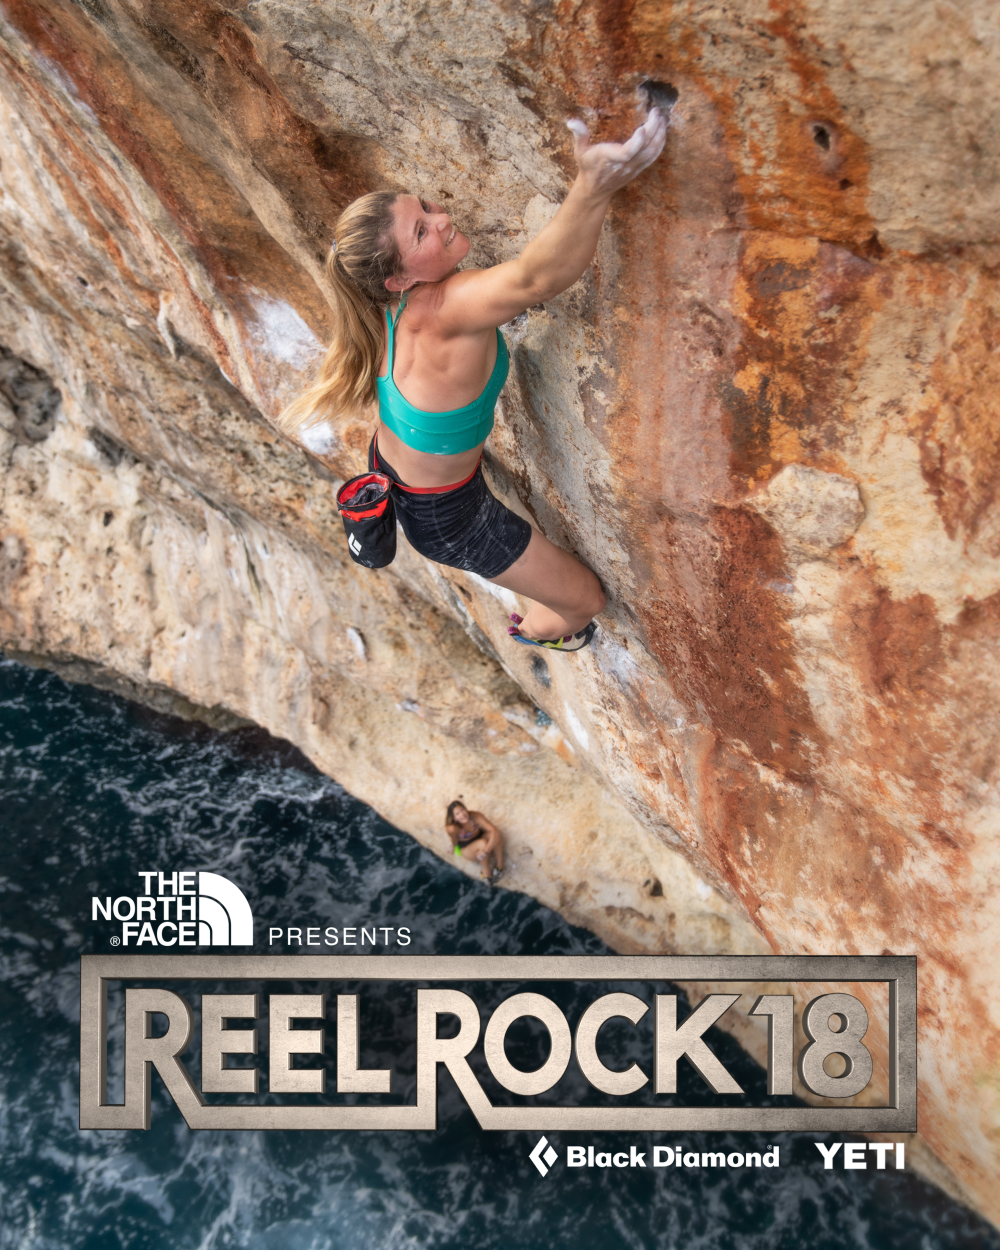 Join us at the Rock and Rope Climbing Centre on Sunday, December 10 at 5:30  PM for a rerun of the Reel Rock 17 Film tour. We will be feat